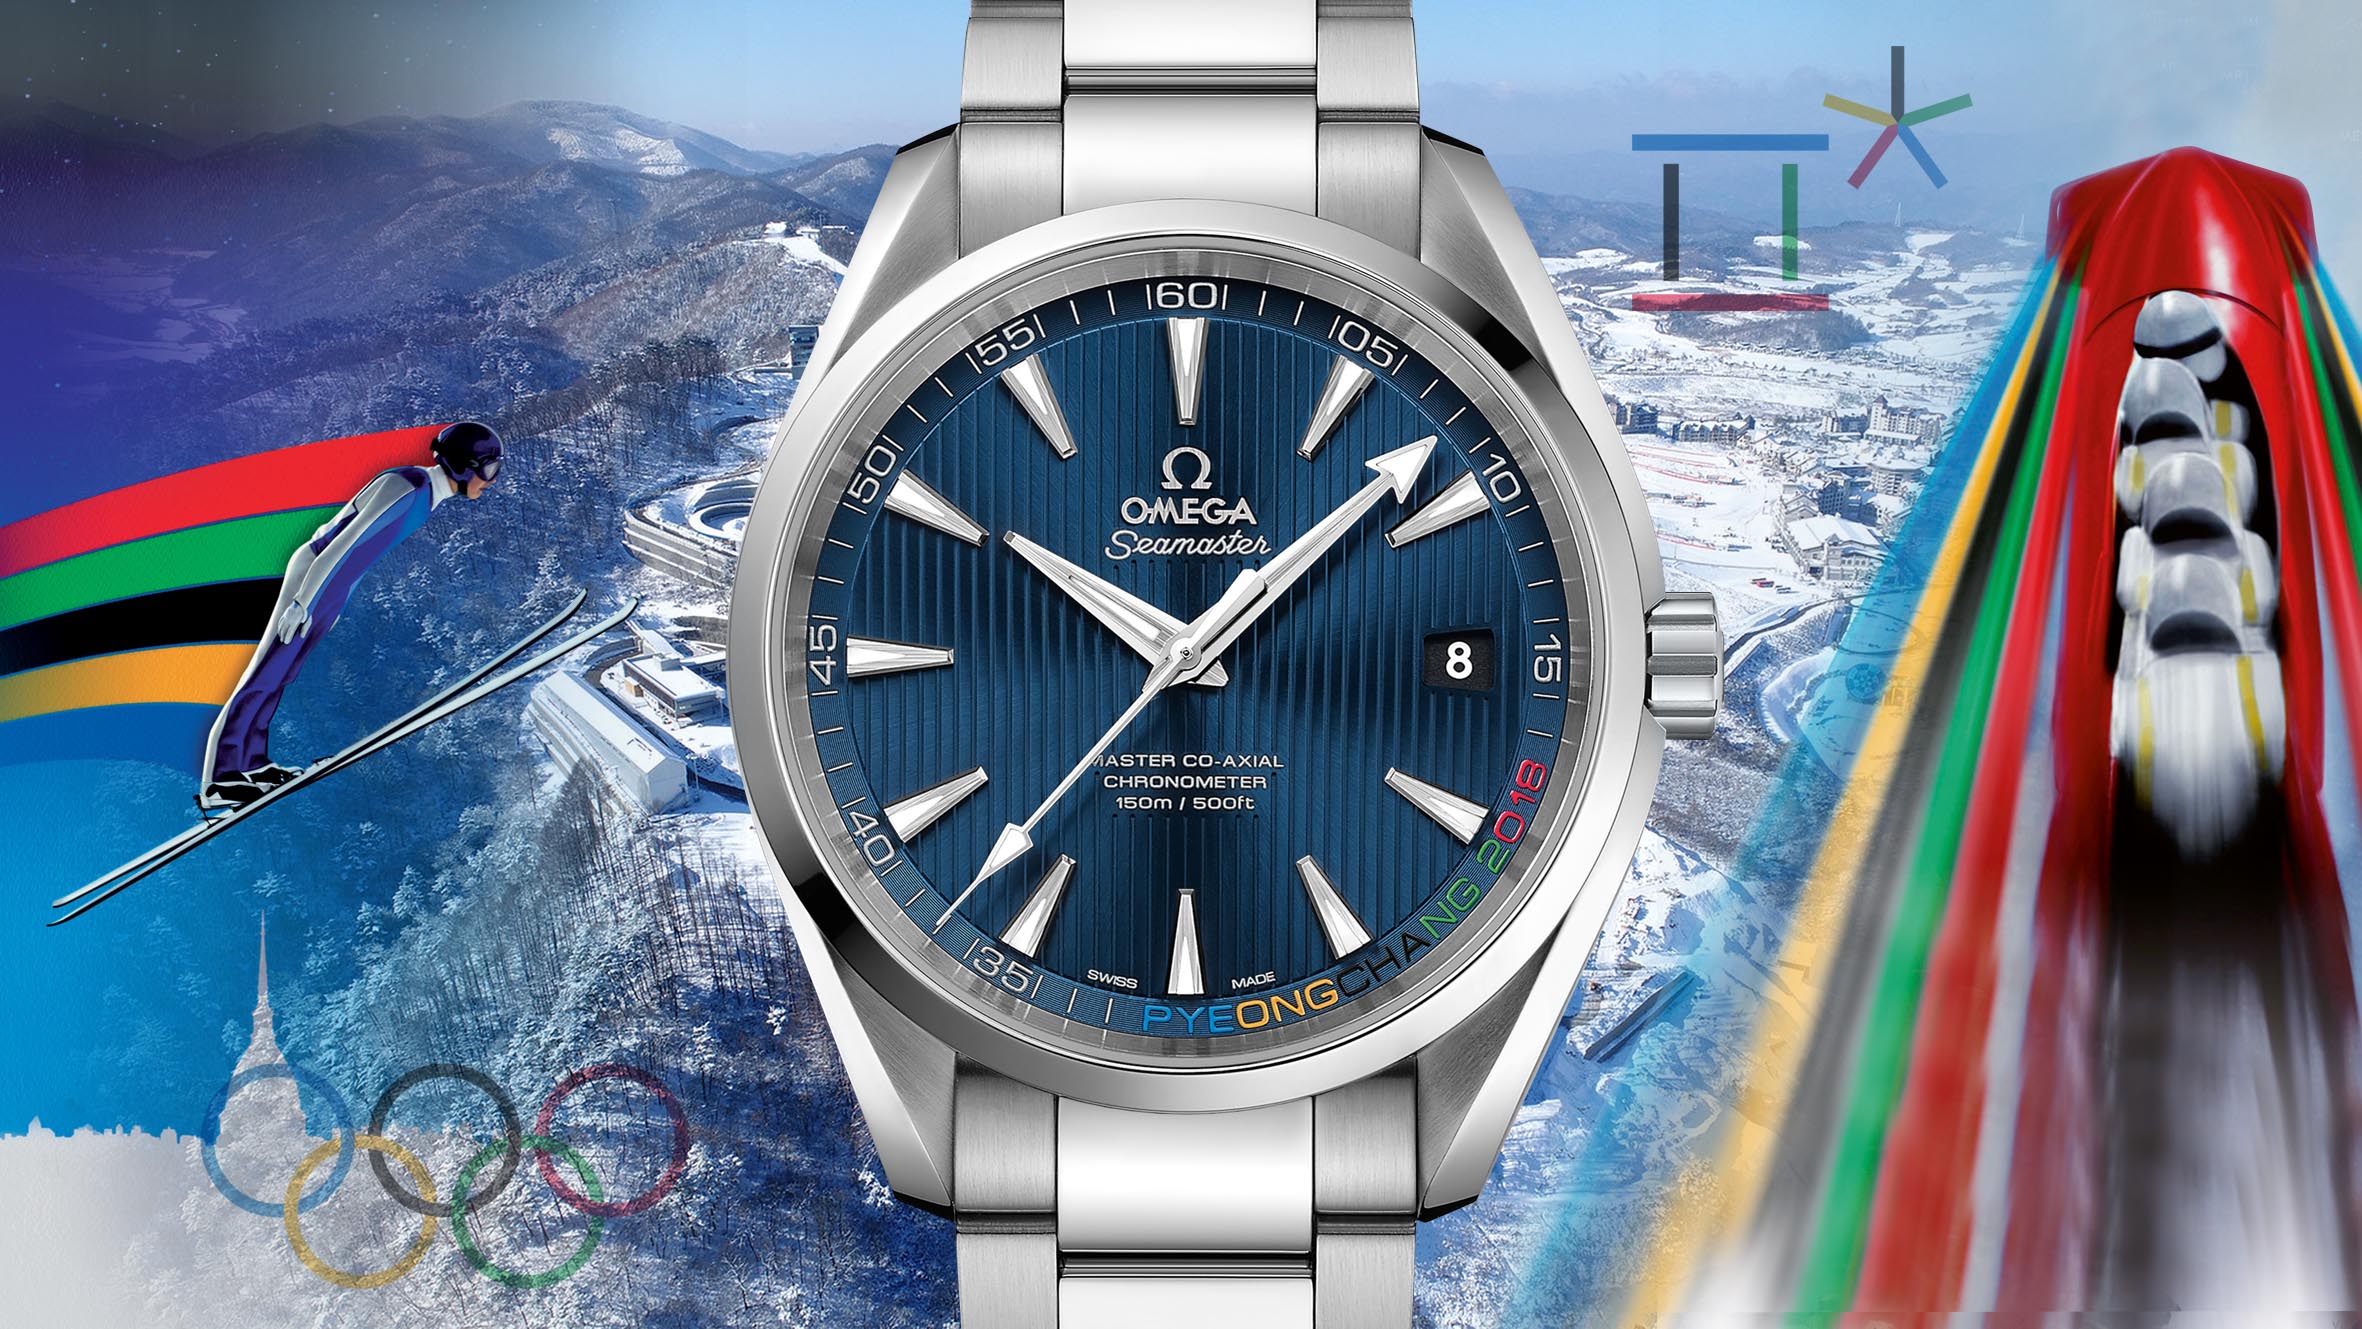 Omega And Their HighPrecision Olympic Legacy